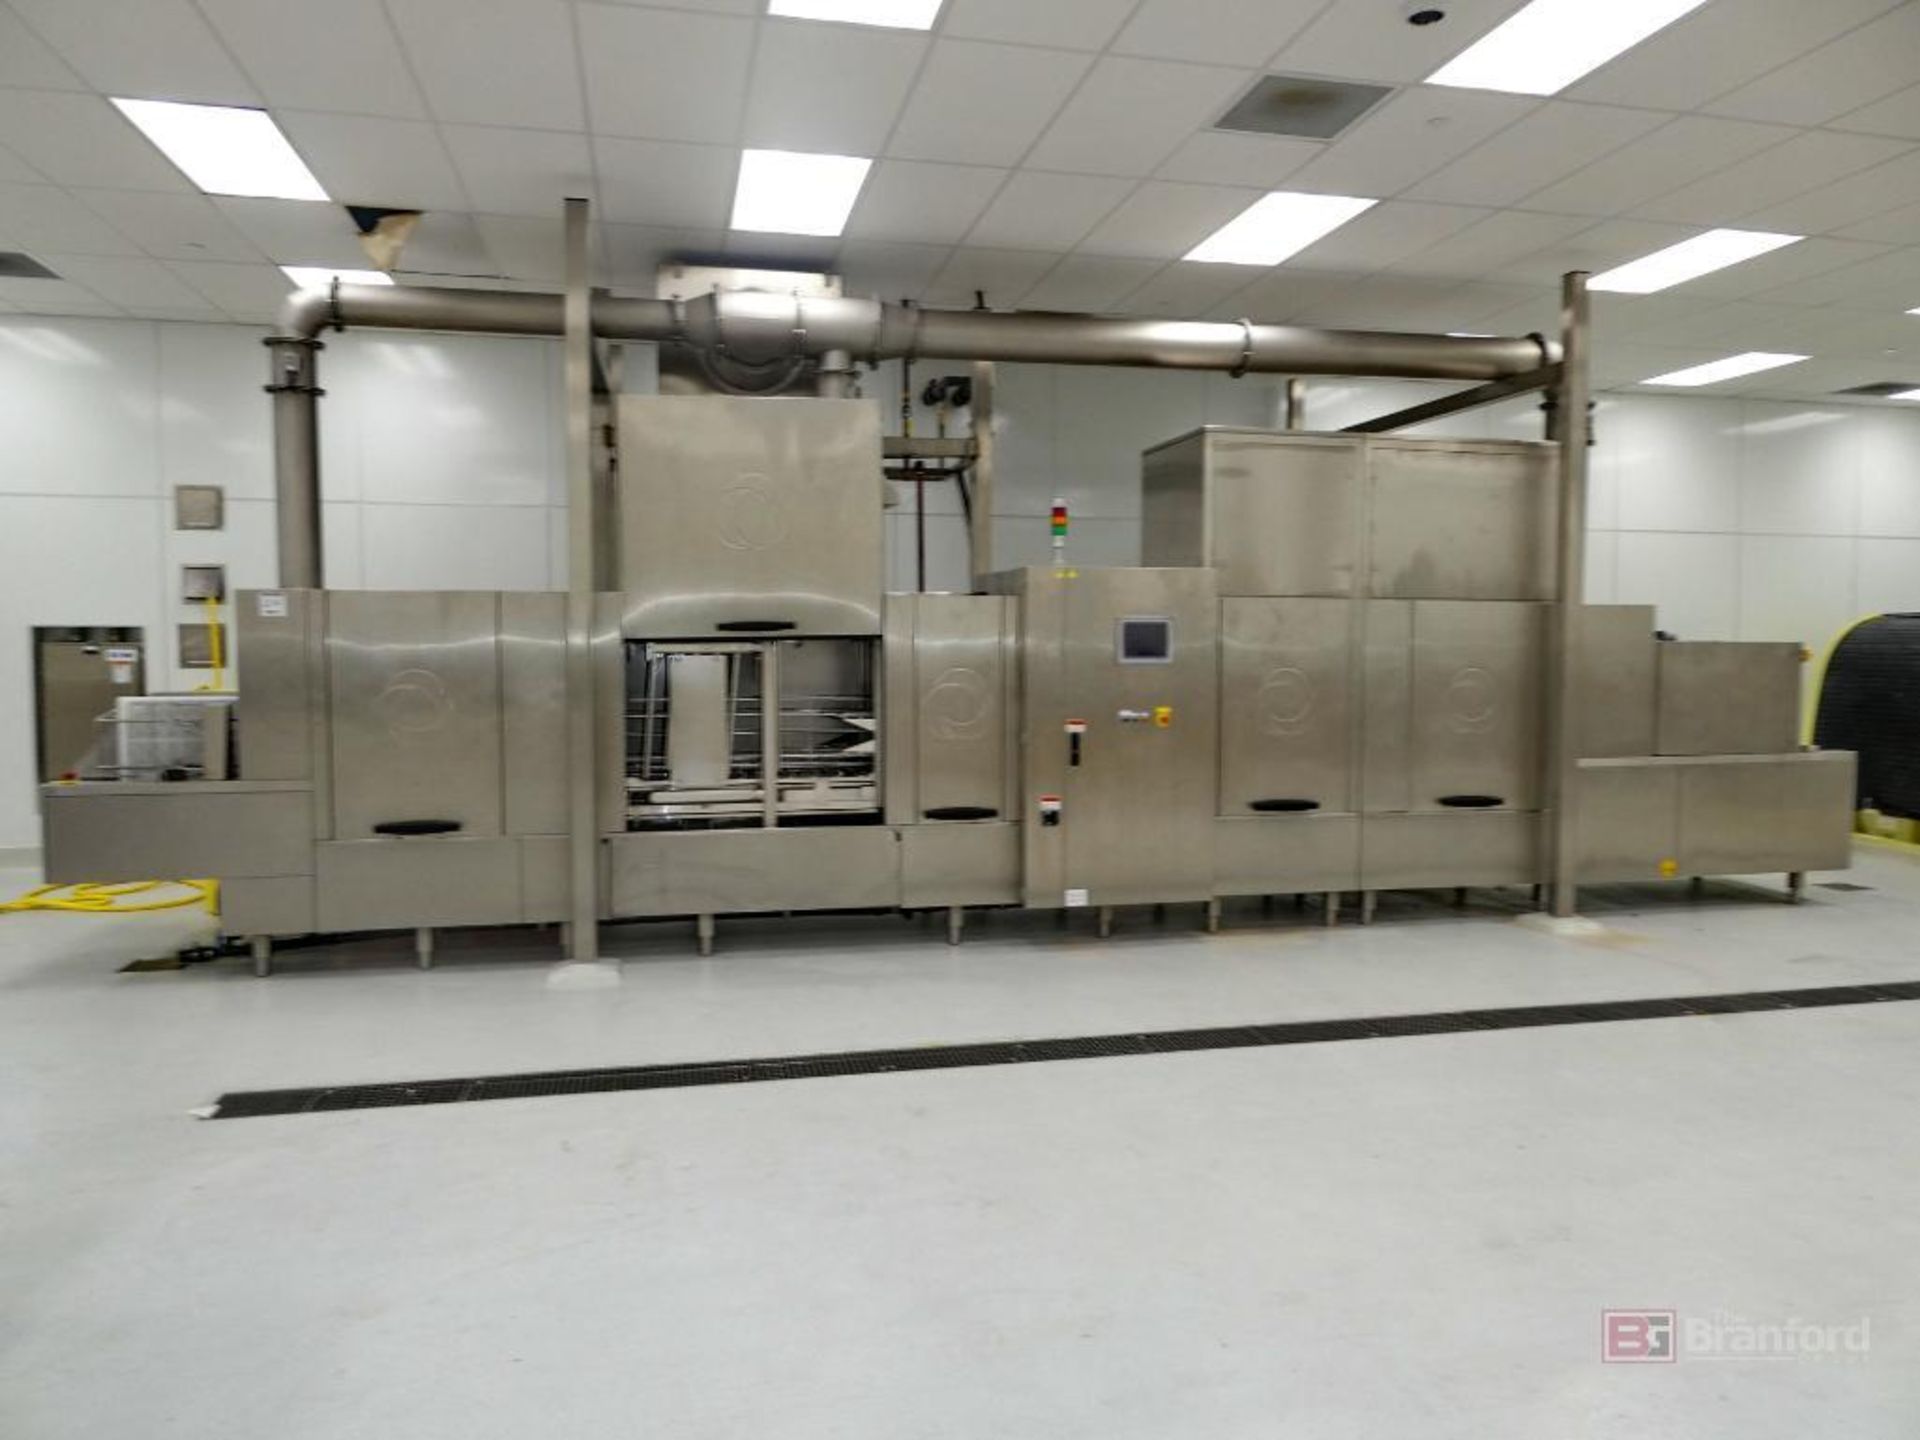 Tanis Non-Starch 1000kg/hr Gummy & Jelly Line (New in Crates/Never Installed) - Image 15 of 17